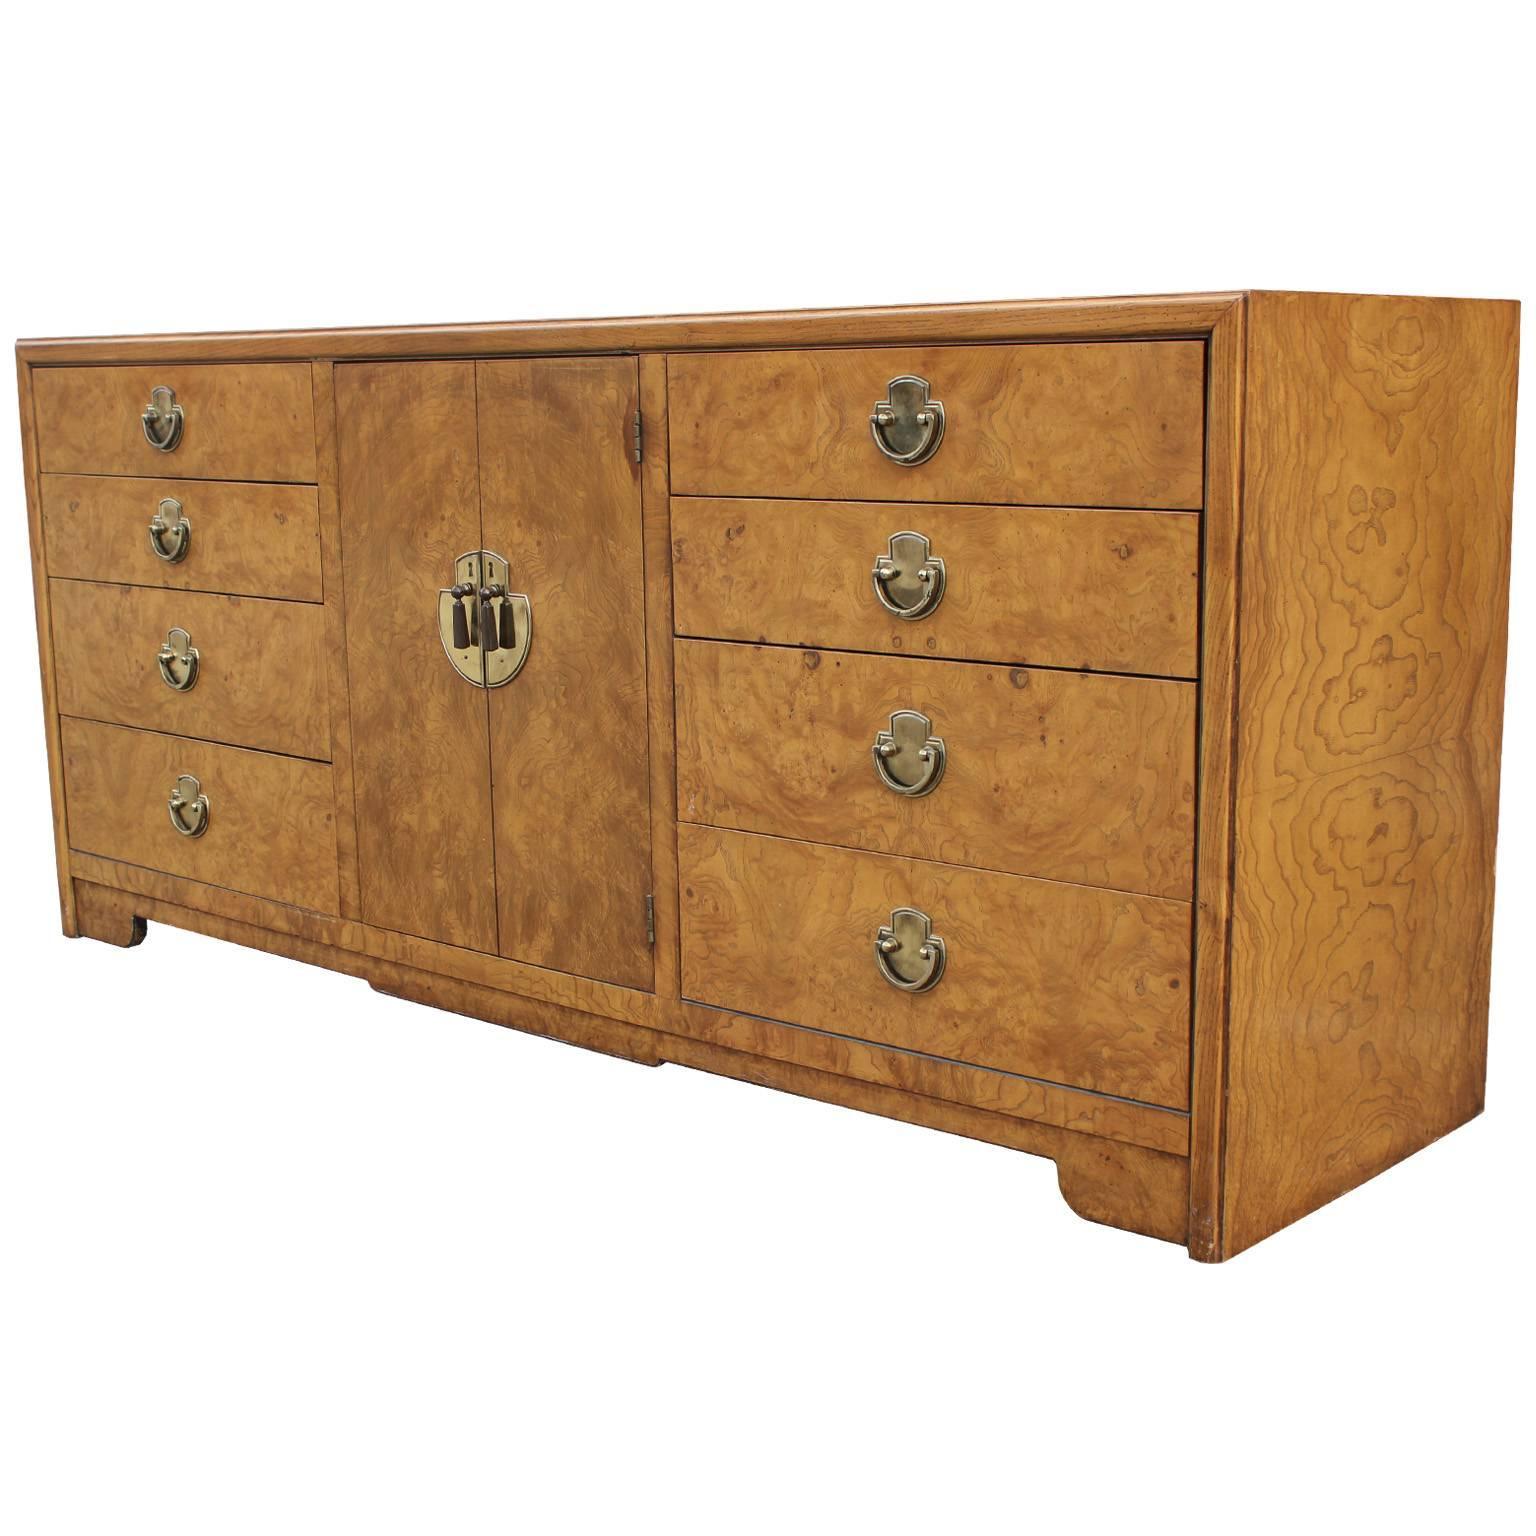 Modern burl and brass dresser with an oriental touch. The grain of the wood is bold and wonderful. The brass has the perfect patina. Behind the middle door more drawers are waiting to be filled up. This dresser would be a great choice and would